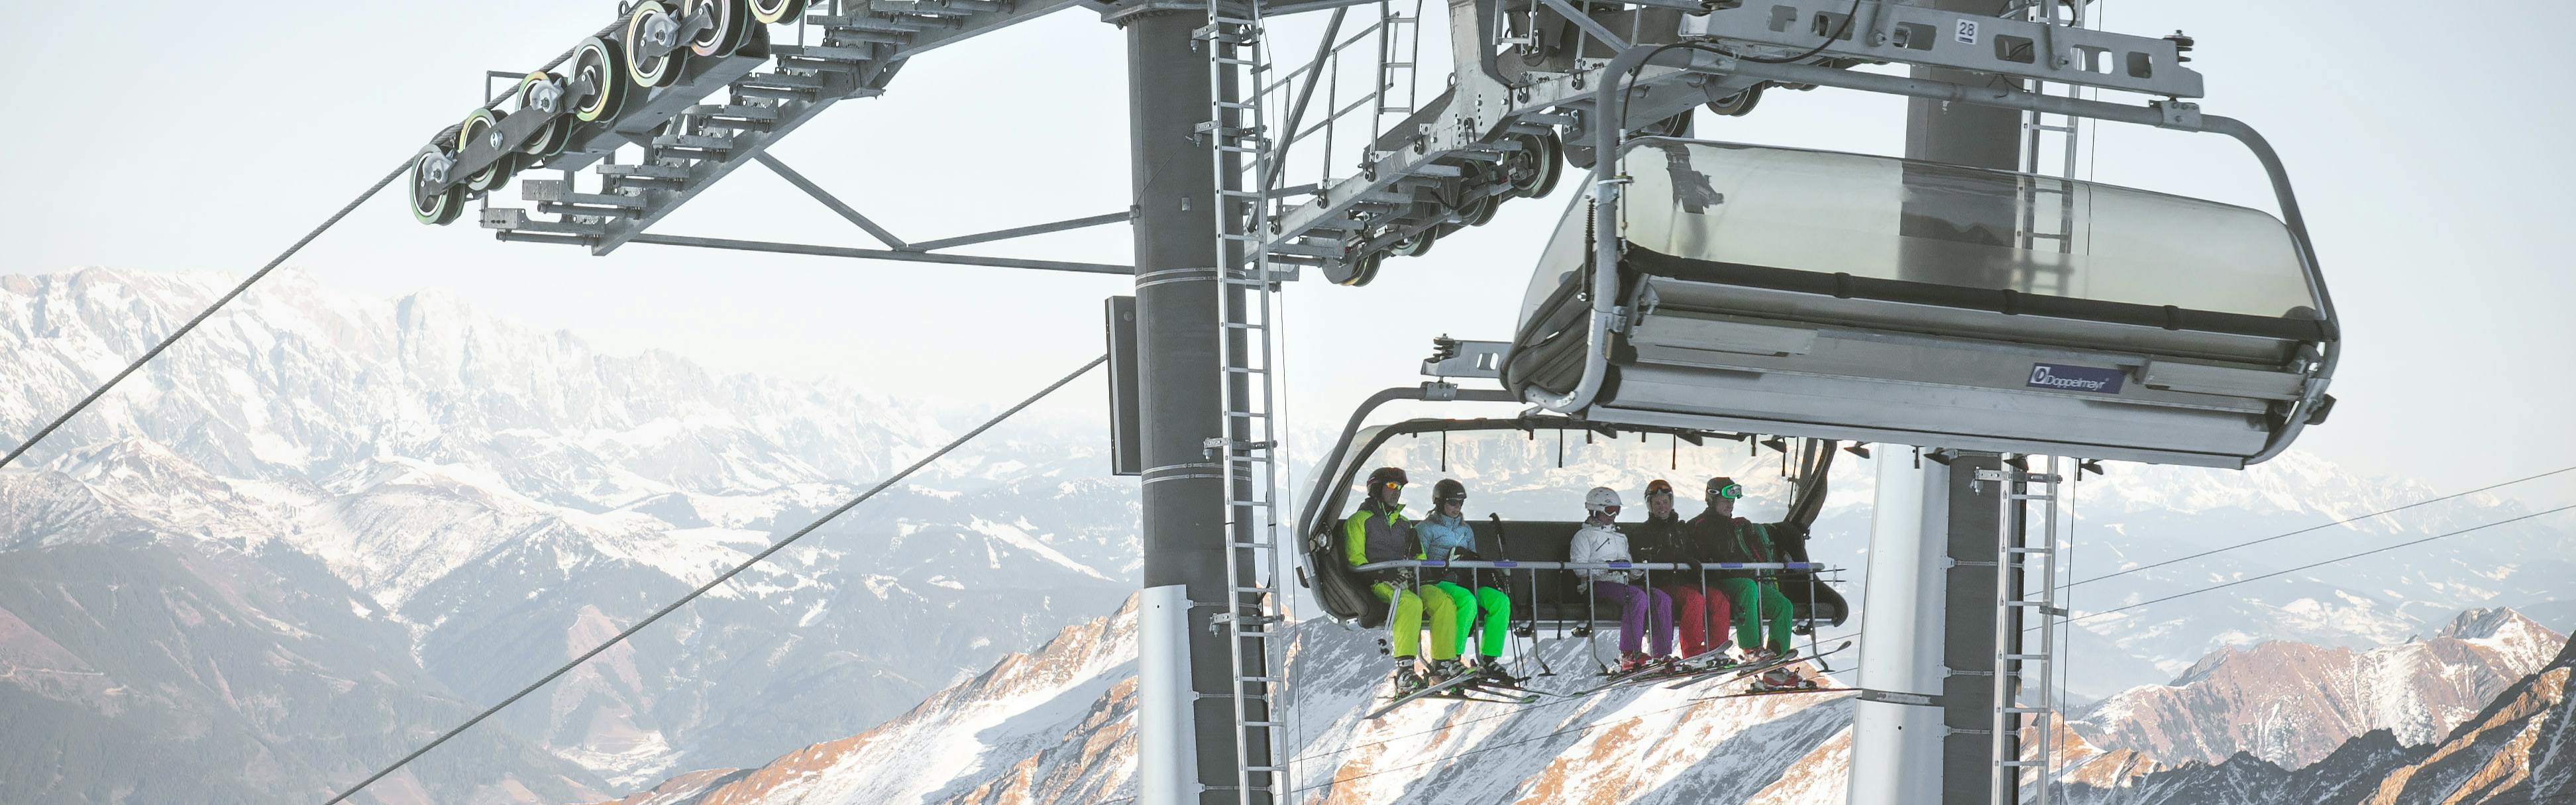 Skiers on a chairlift with snowy mountains in the background. 